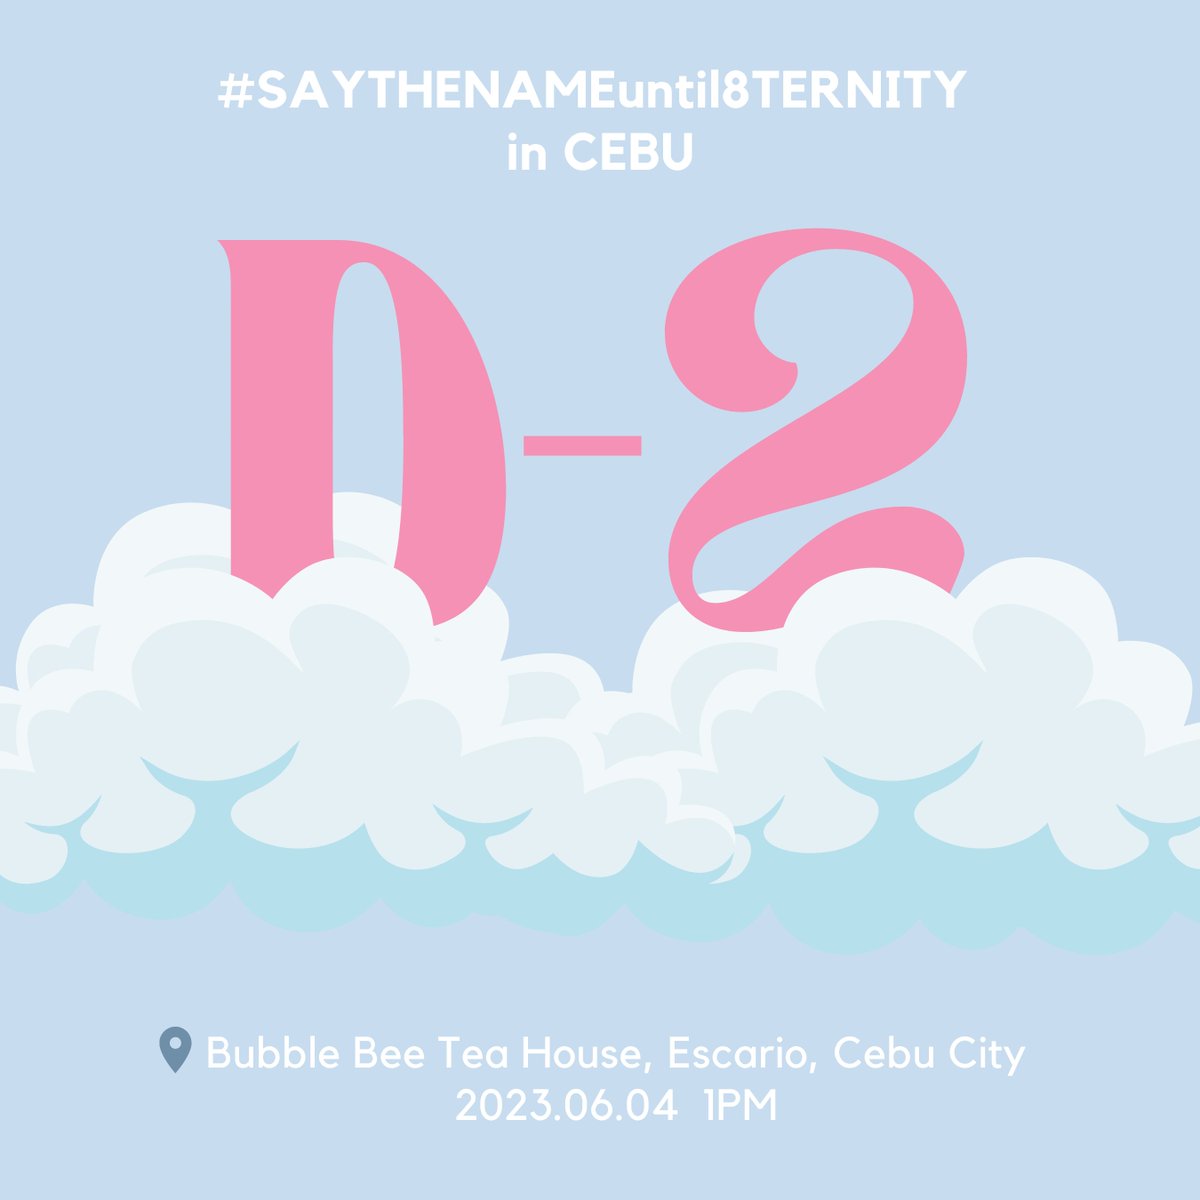 Tick tock! It’s time to get excited because it’s almost #SAYTHENAMEuntil8TERNITY Cebu Chapter's turn in 2 days!! 🥳

#SVT_8th_Anniversary 
#8Years_with_CARAT